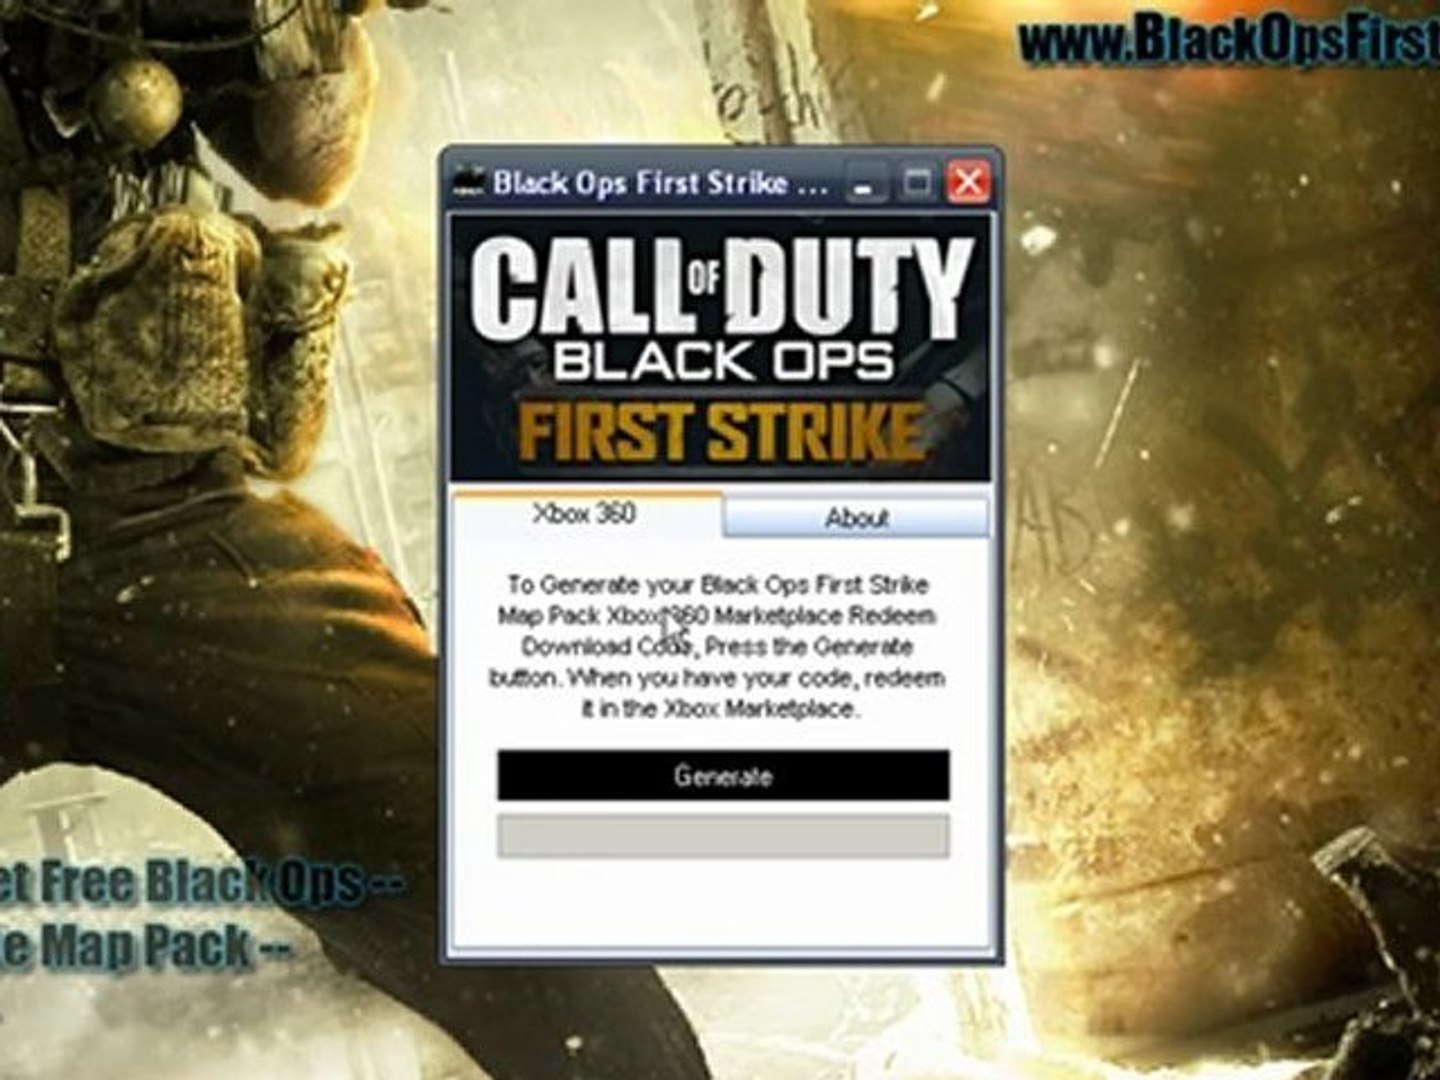 Black Ops First Strike Dlc Code Leaked - Xbox 360 Only! - Video Dailymotion